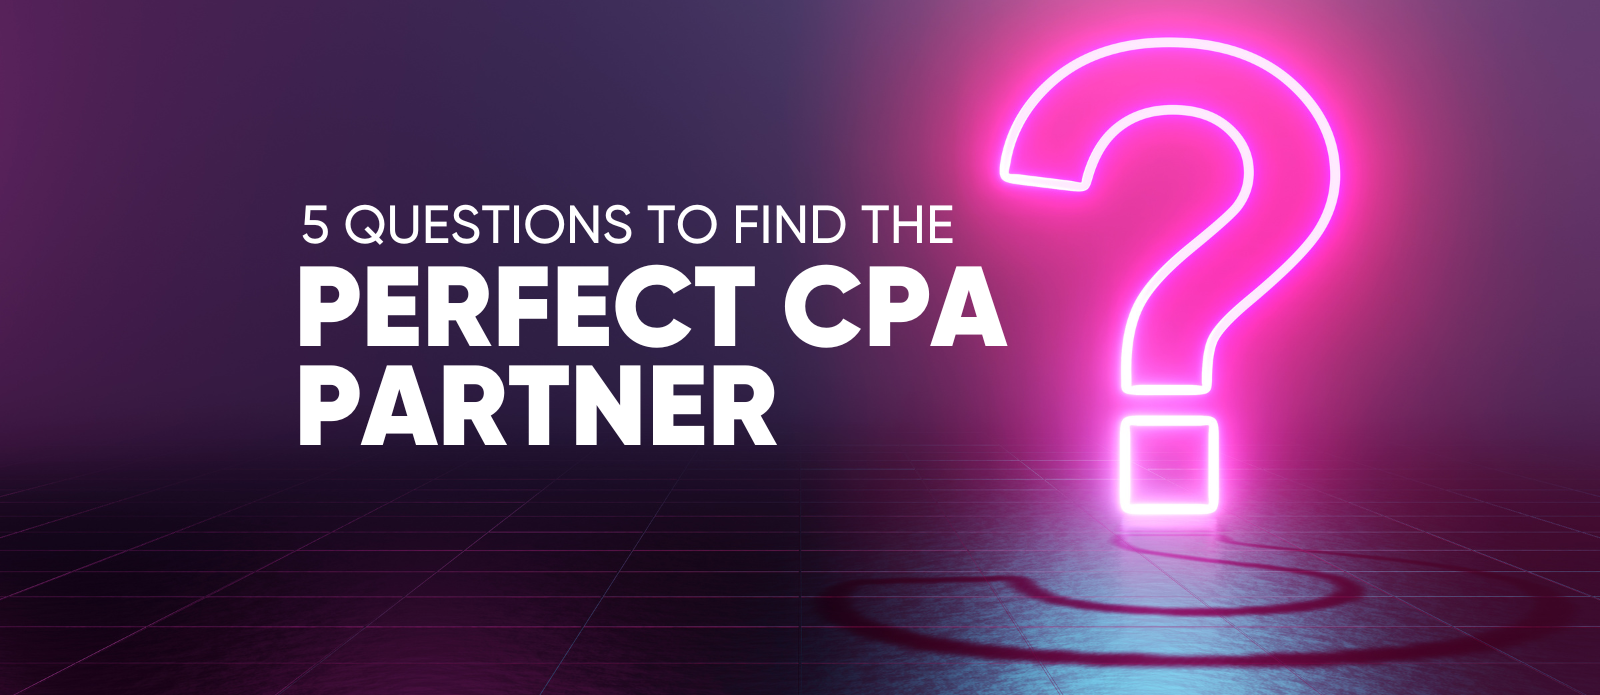 question mark neon 5 questions to find the perfect CPA partner